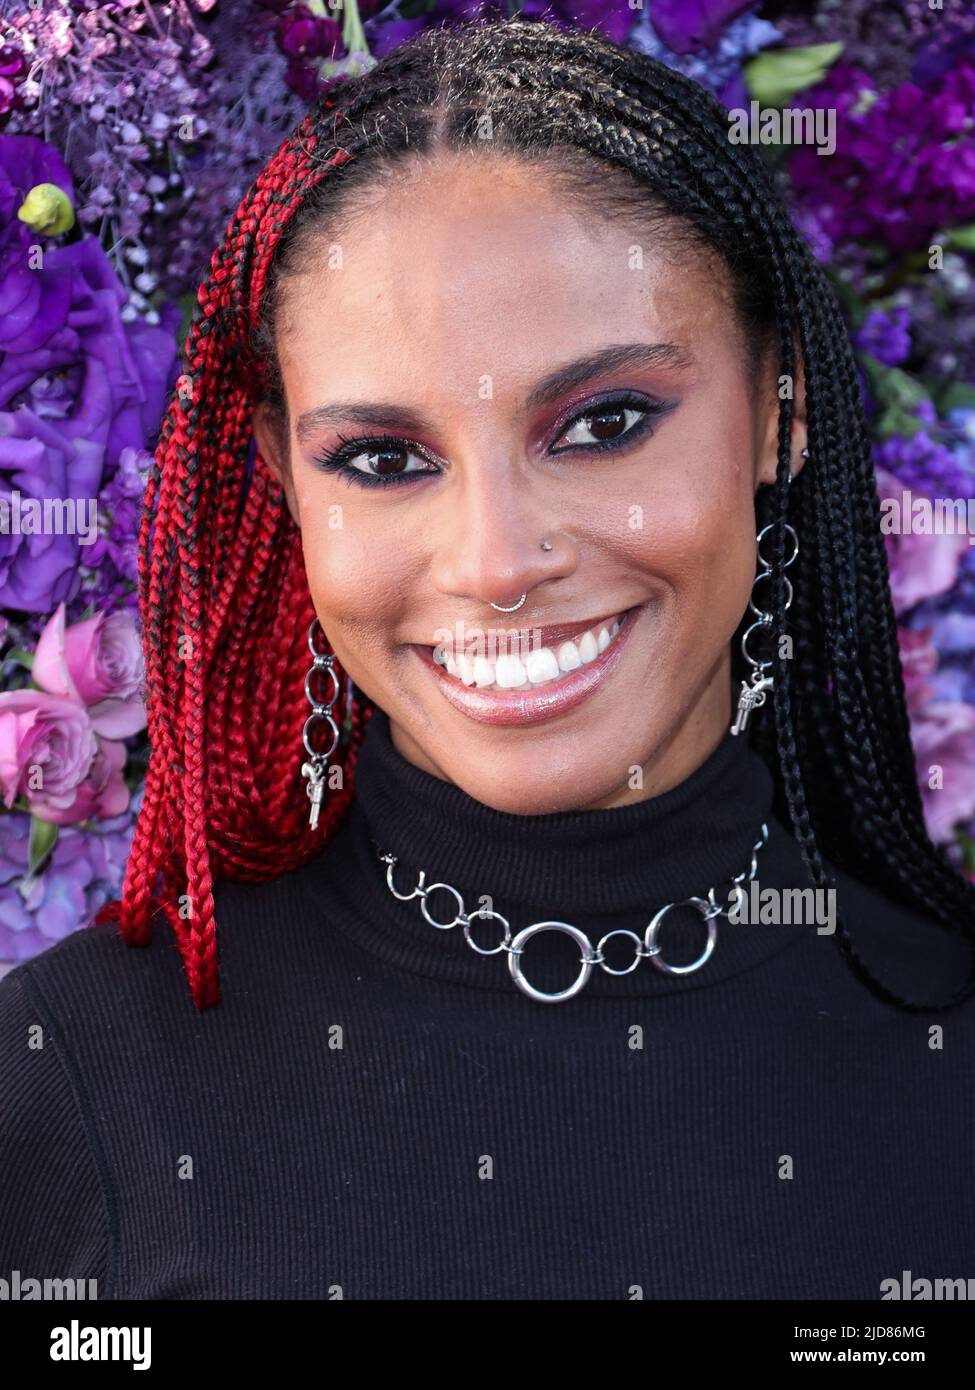 Los Angeles, USA. 18th June 2022. LOS ANGELES, CALIFORNIA, USA - JUNE 18: American television personality Ryan Elizabeth Peete arrives at HollyRod Foundation's DesignCare 2022 Gala held at RJ's Place on June 18, 2022 in Los Angeles, California, United States. (Photo by Xavier Collin/Image Press Agency) Credit: Image Press Agency/Alamy Live News Stock Photo